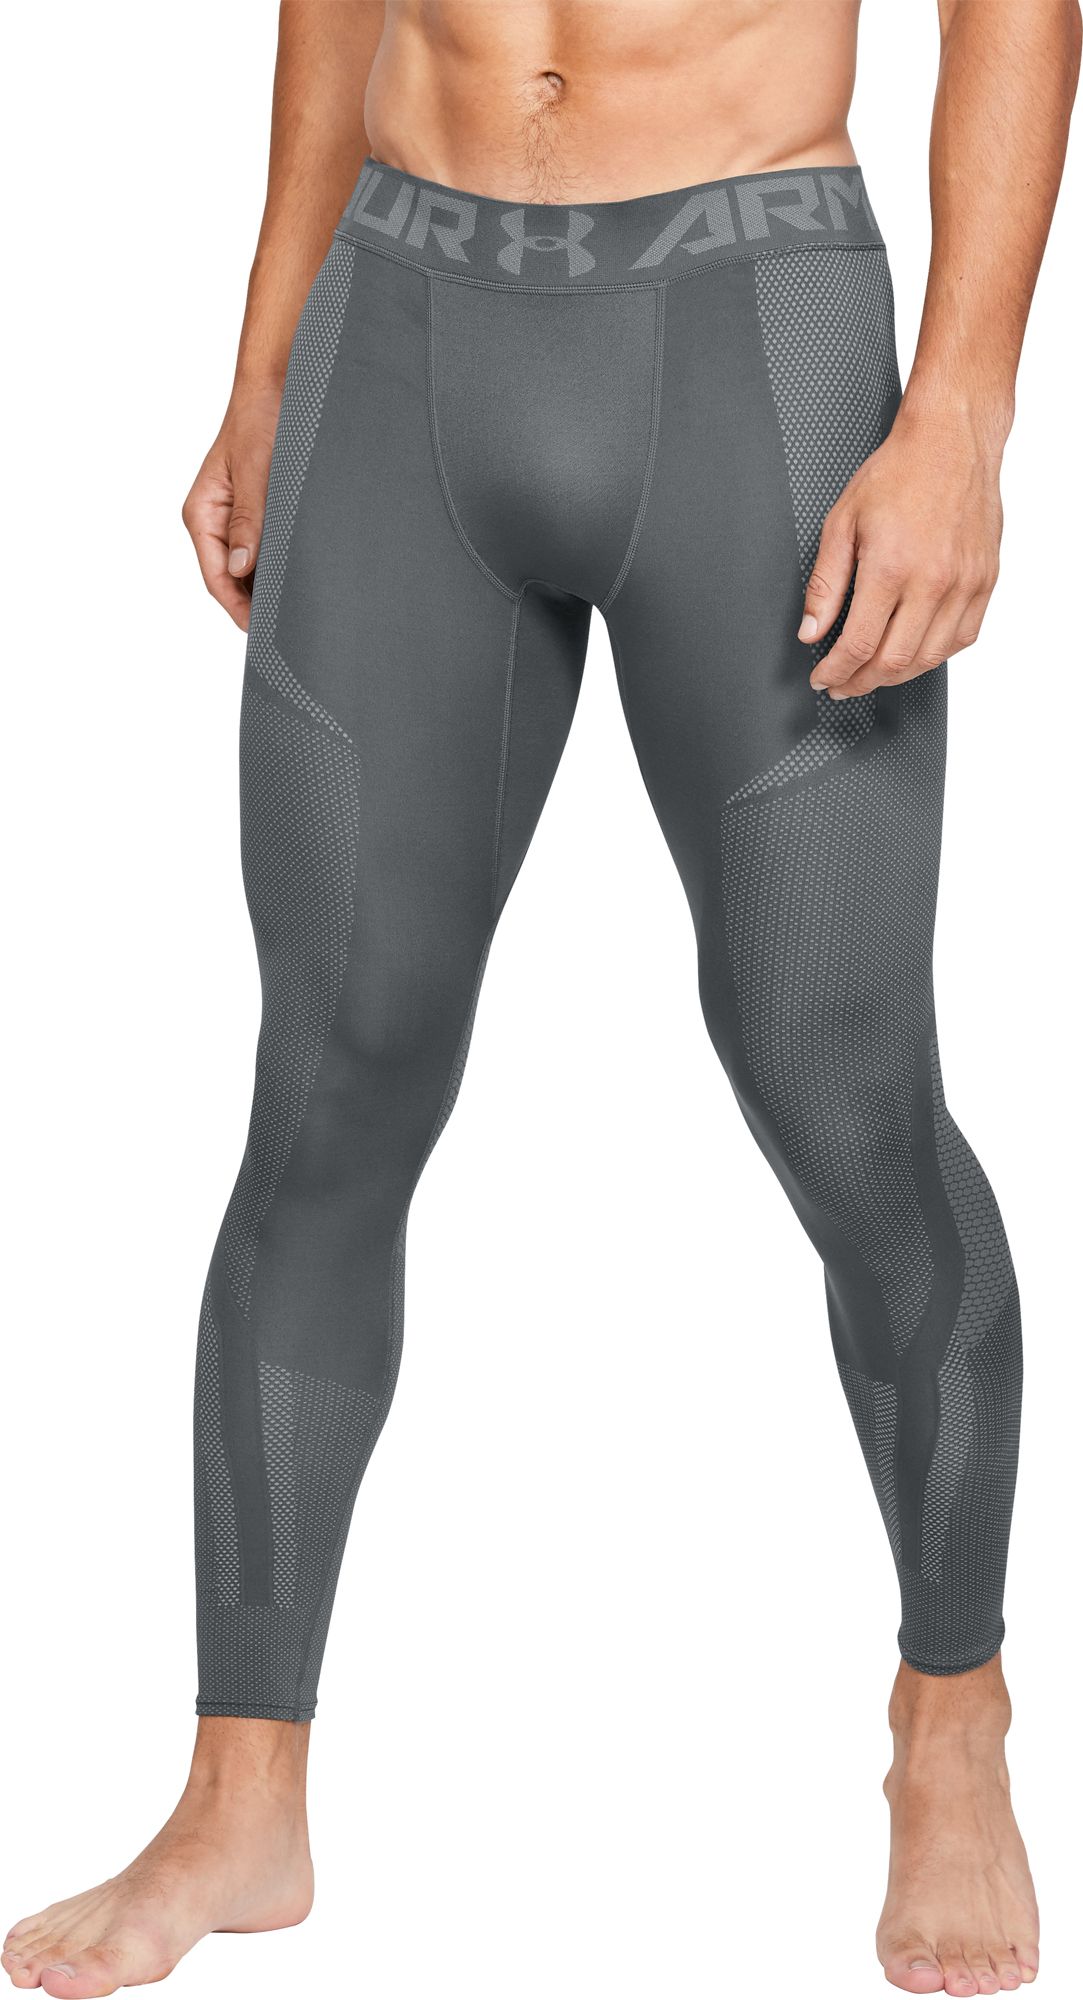 men's under armour tights